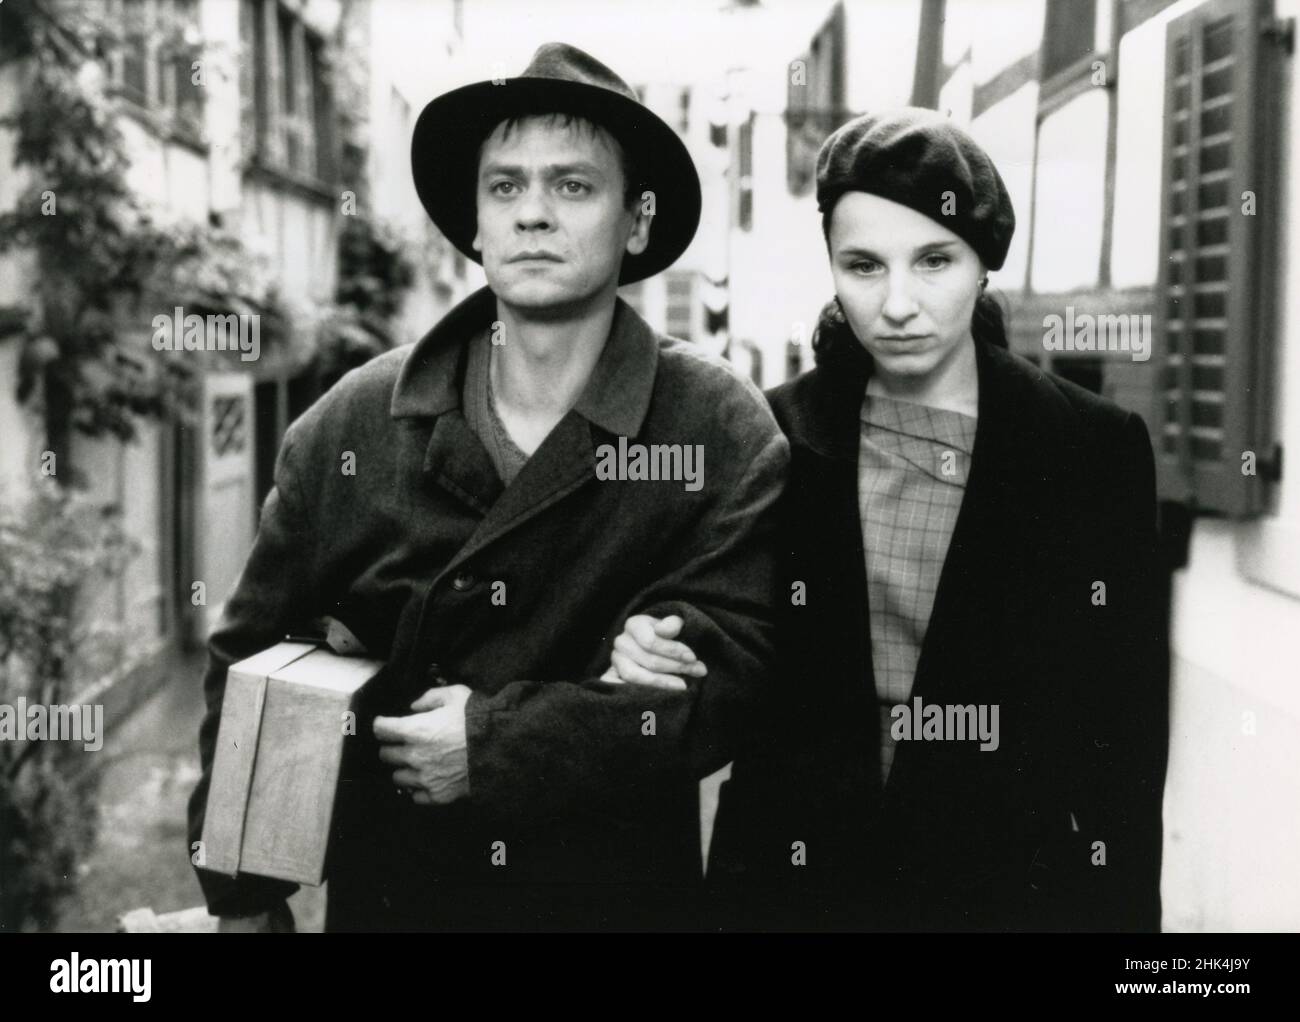 Actors Sylvester Groth and Meret Becker in the movie The Volcano, Germany 1999 Stock Photo